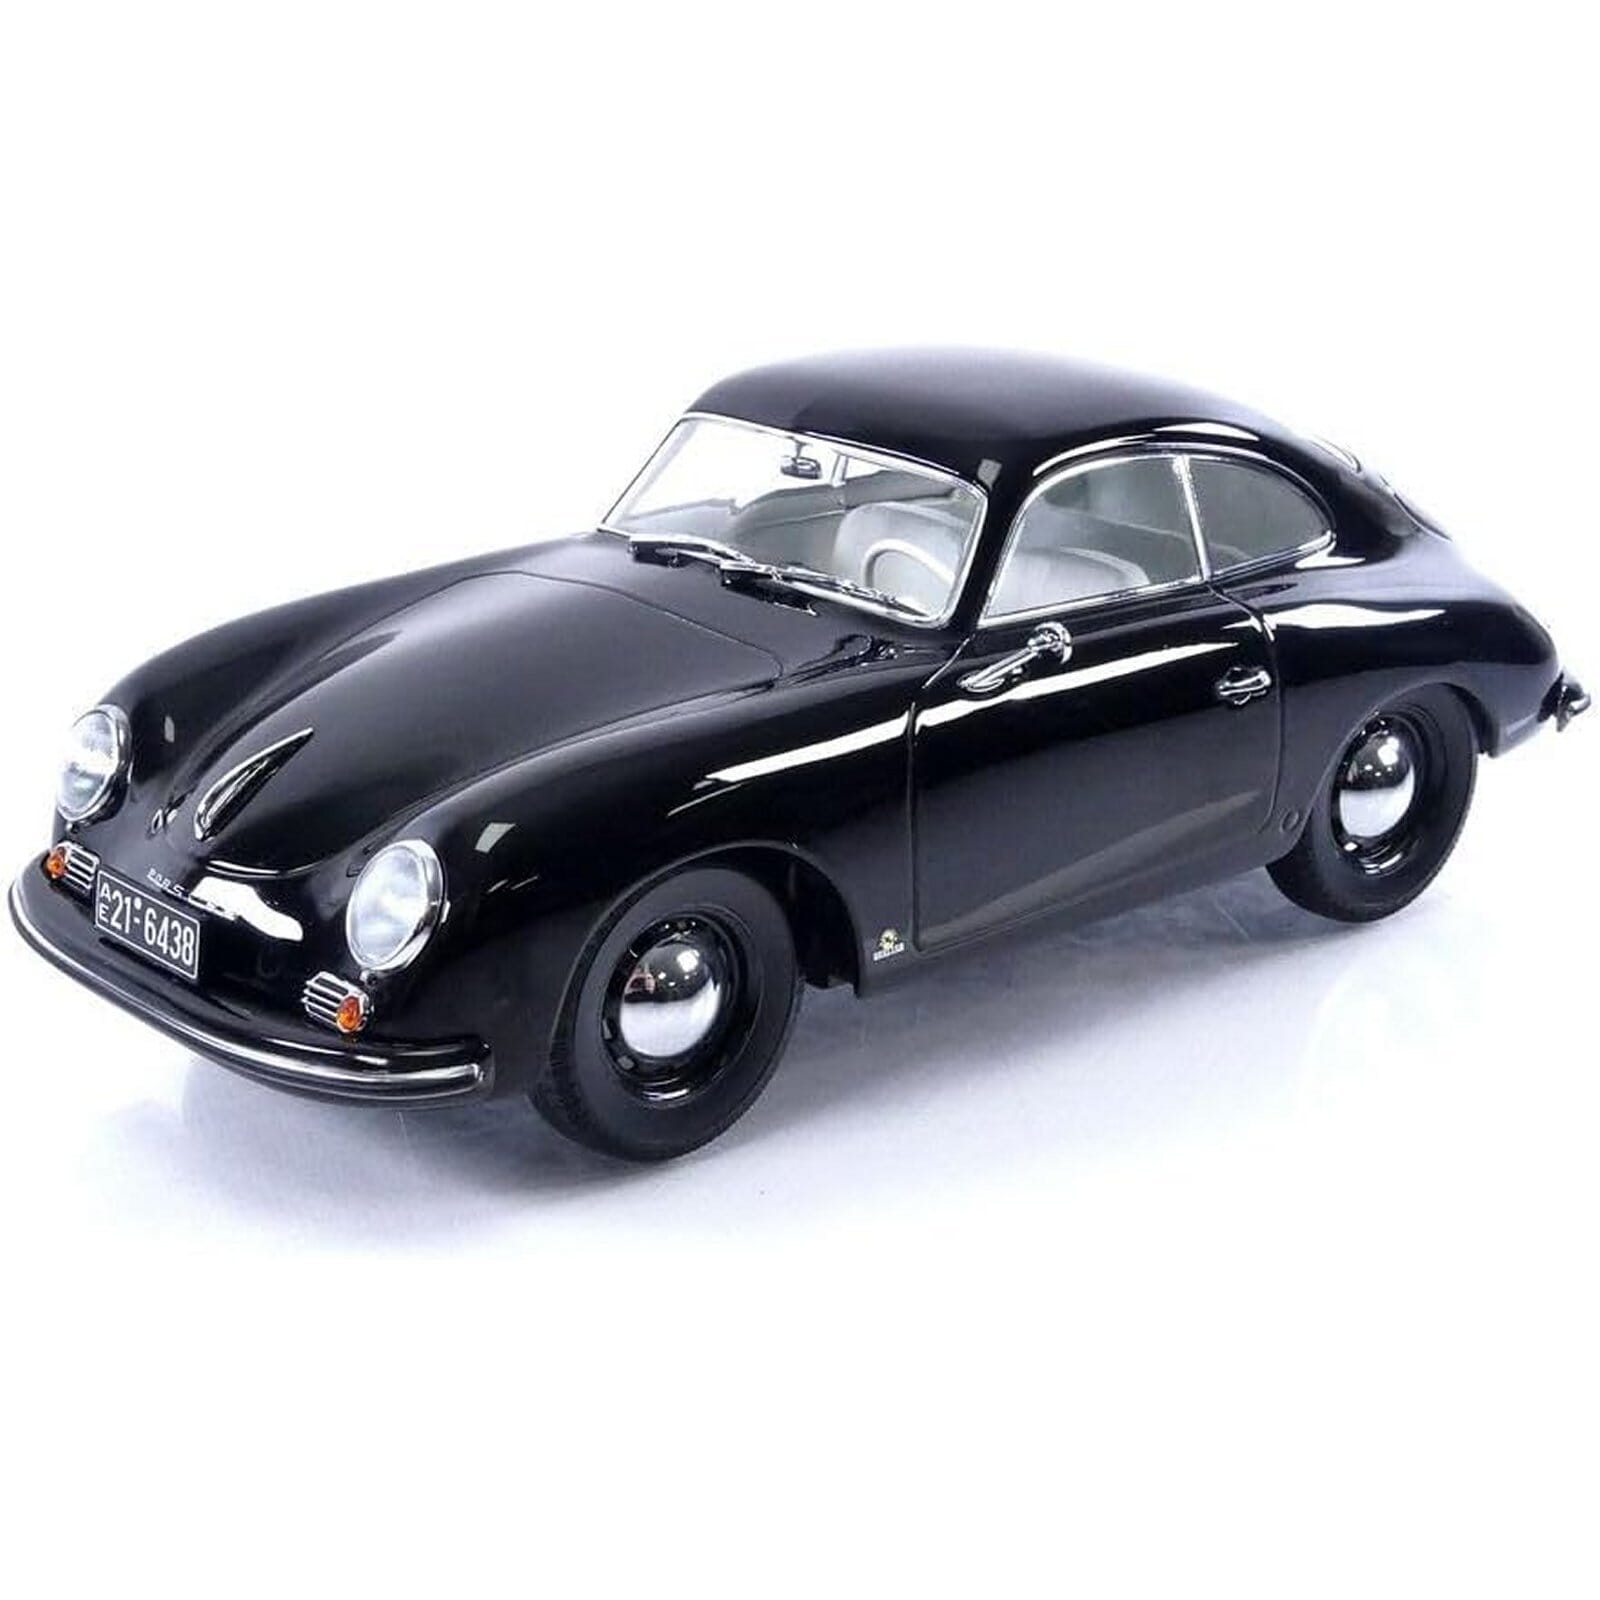 1:18 Diecast Model Cars | 1:18 Scale Model Cars